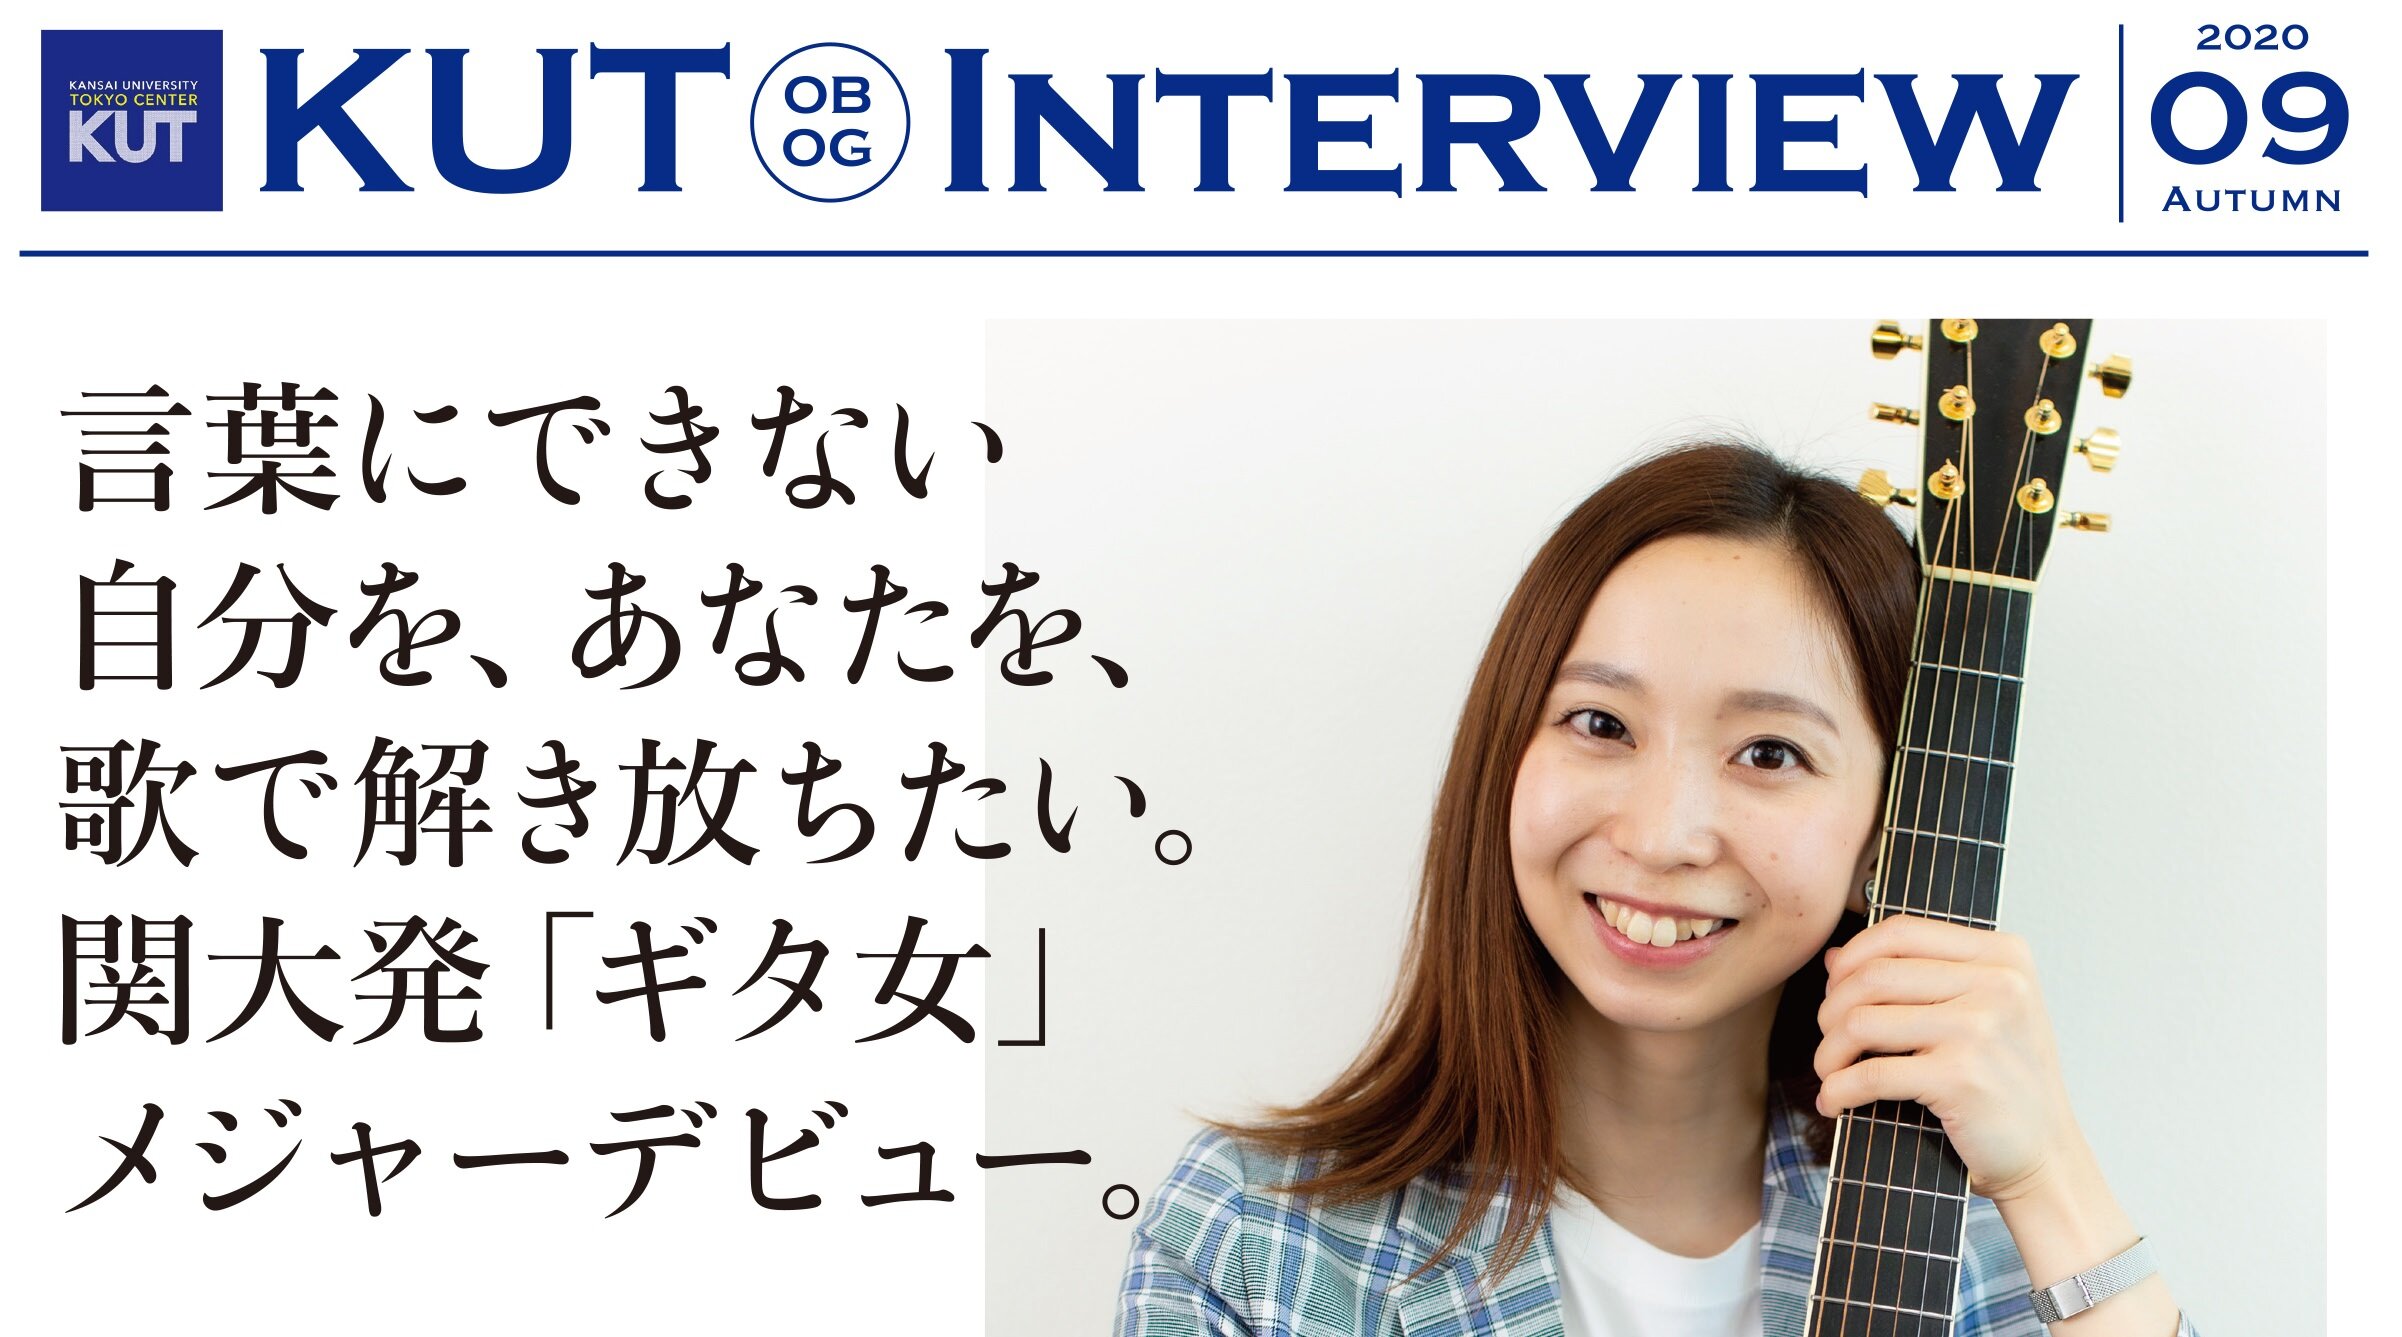 〈KUT INTERVIEW 第９号〉首都圏で活躍する卒業生をご紹介します